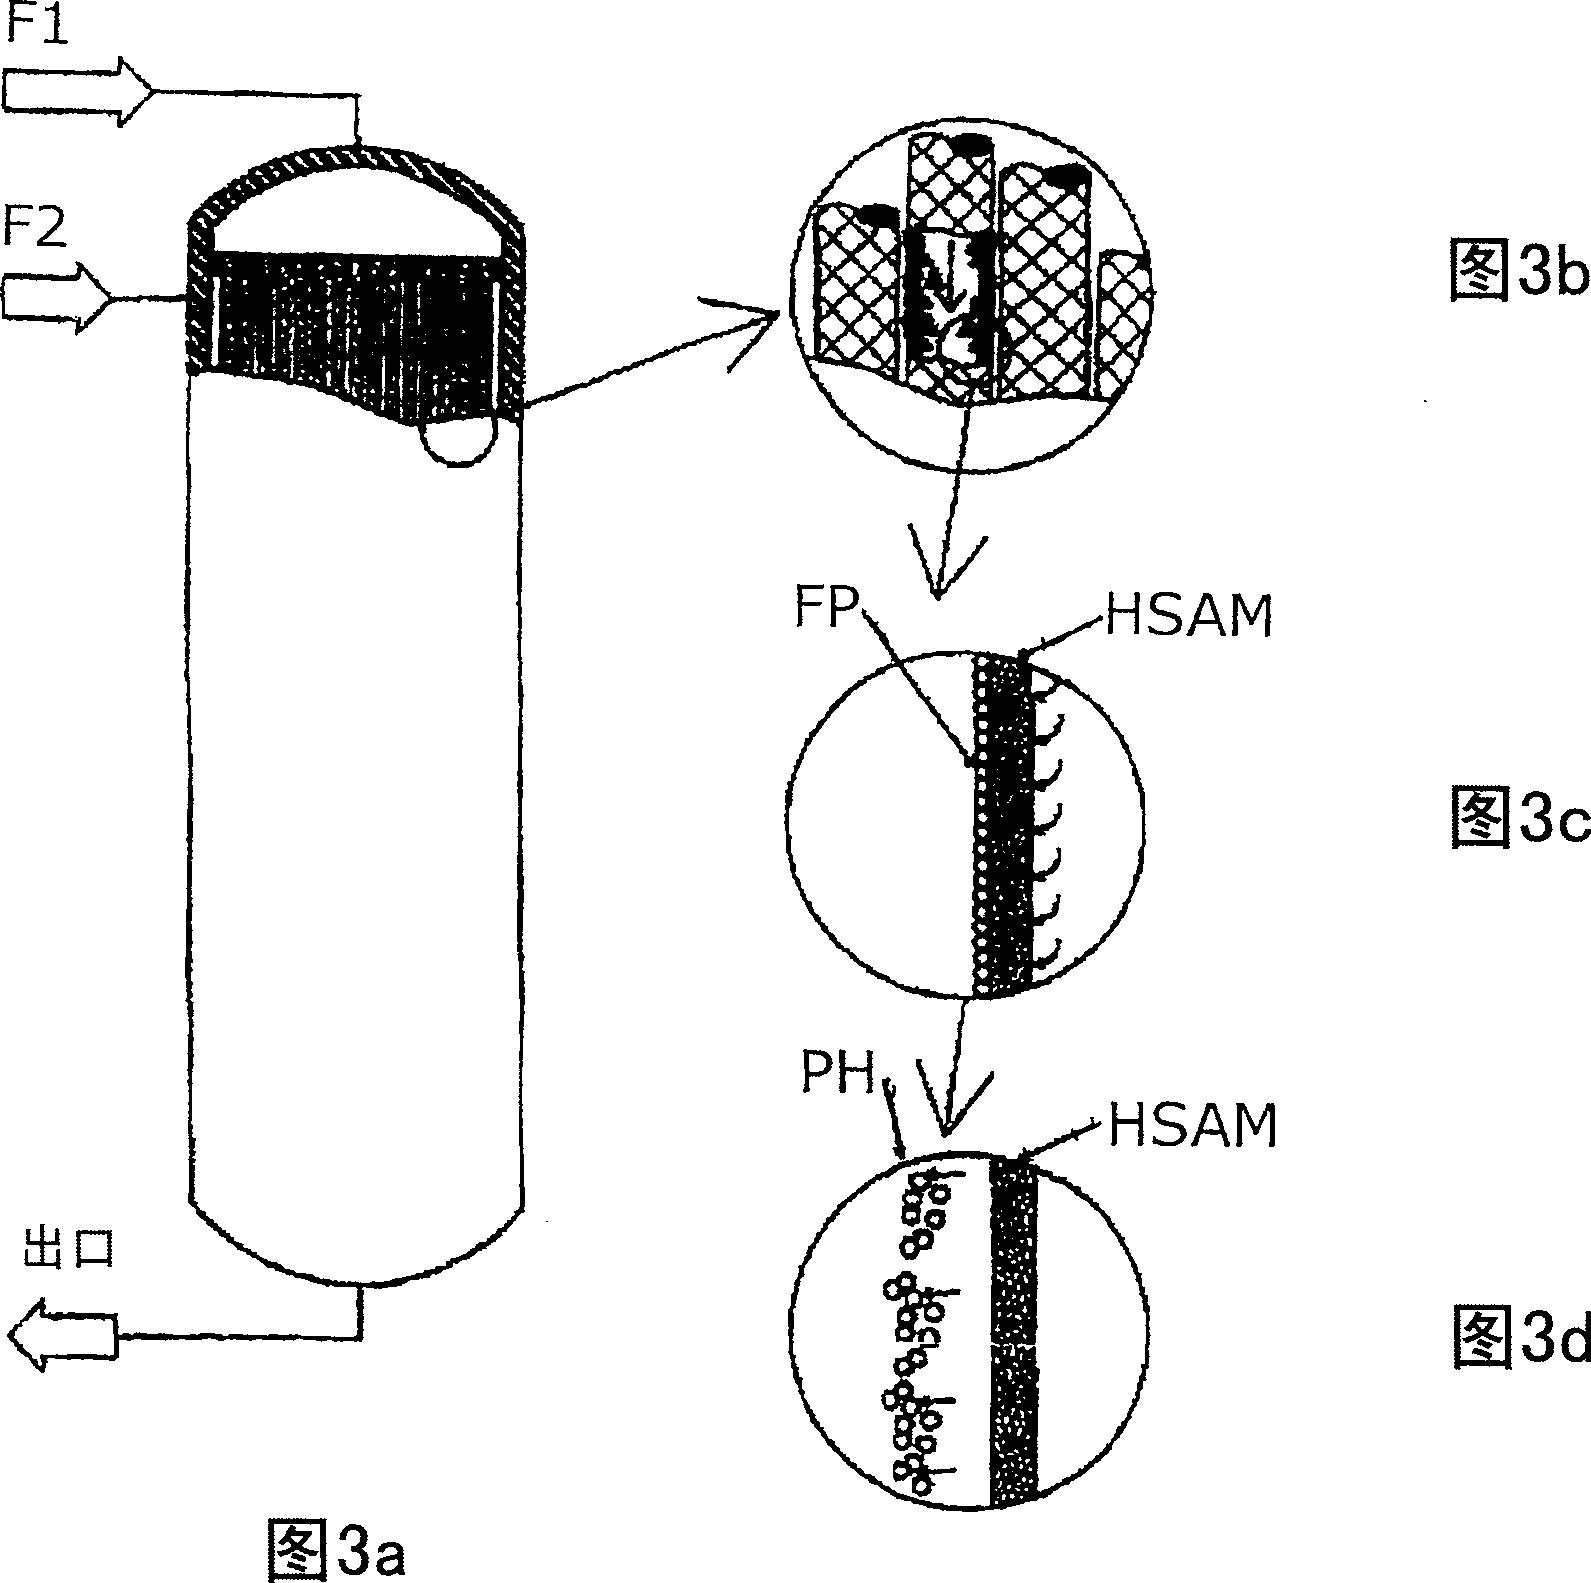 Systems for preparing fine particles and other substances